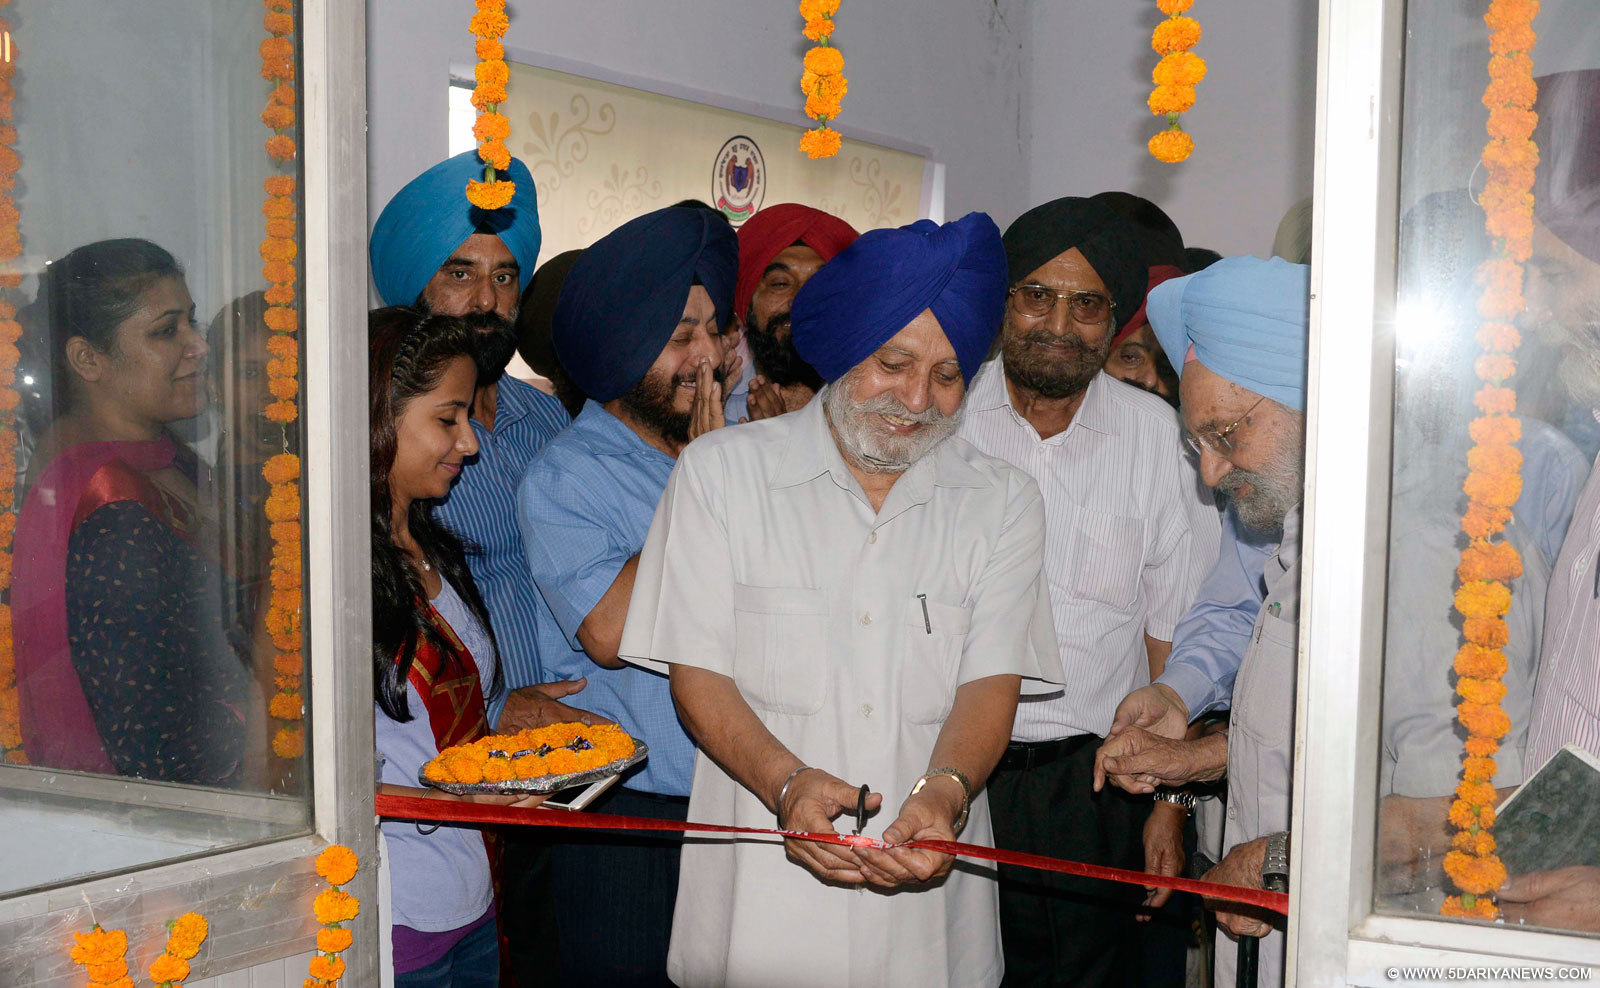 Punjab Government Committed For Providing World Class Sports Infrastructure - Dr Charanjit Singh Atwal